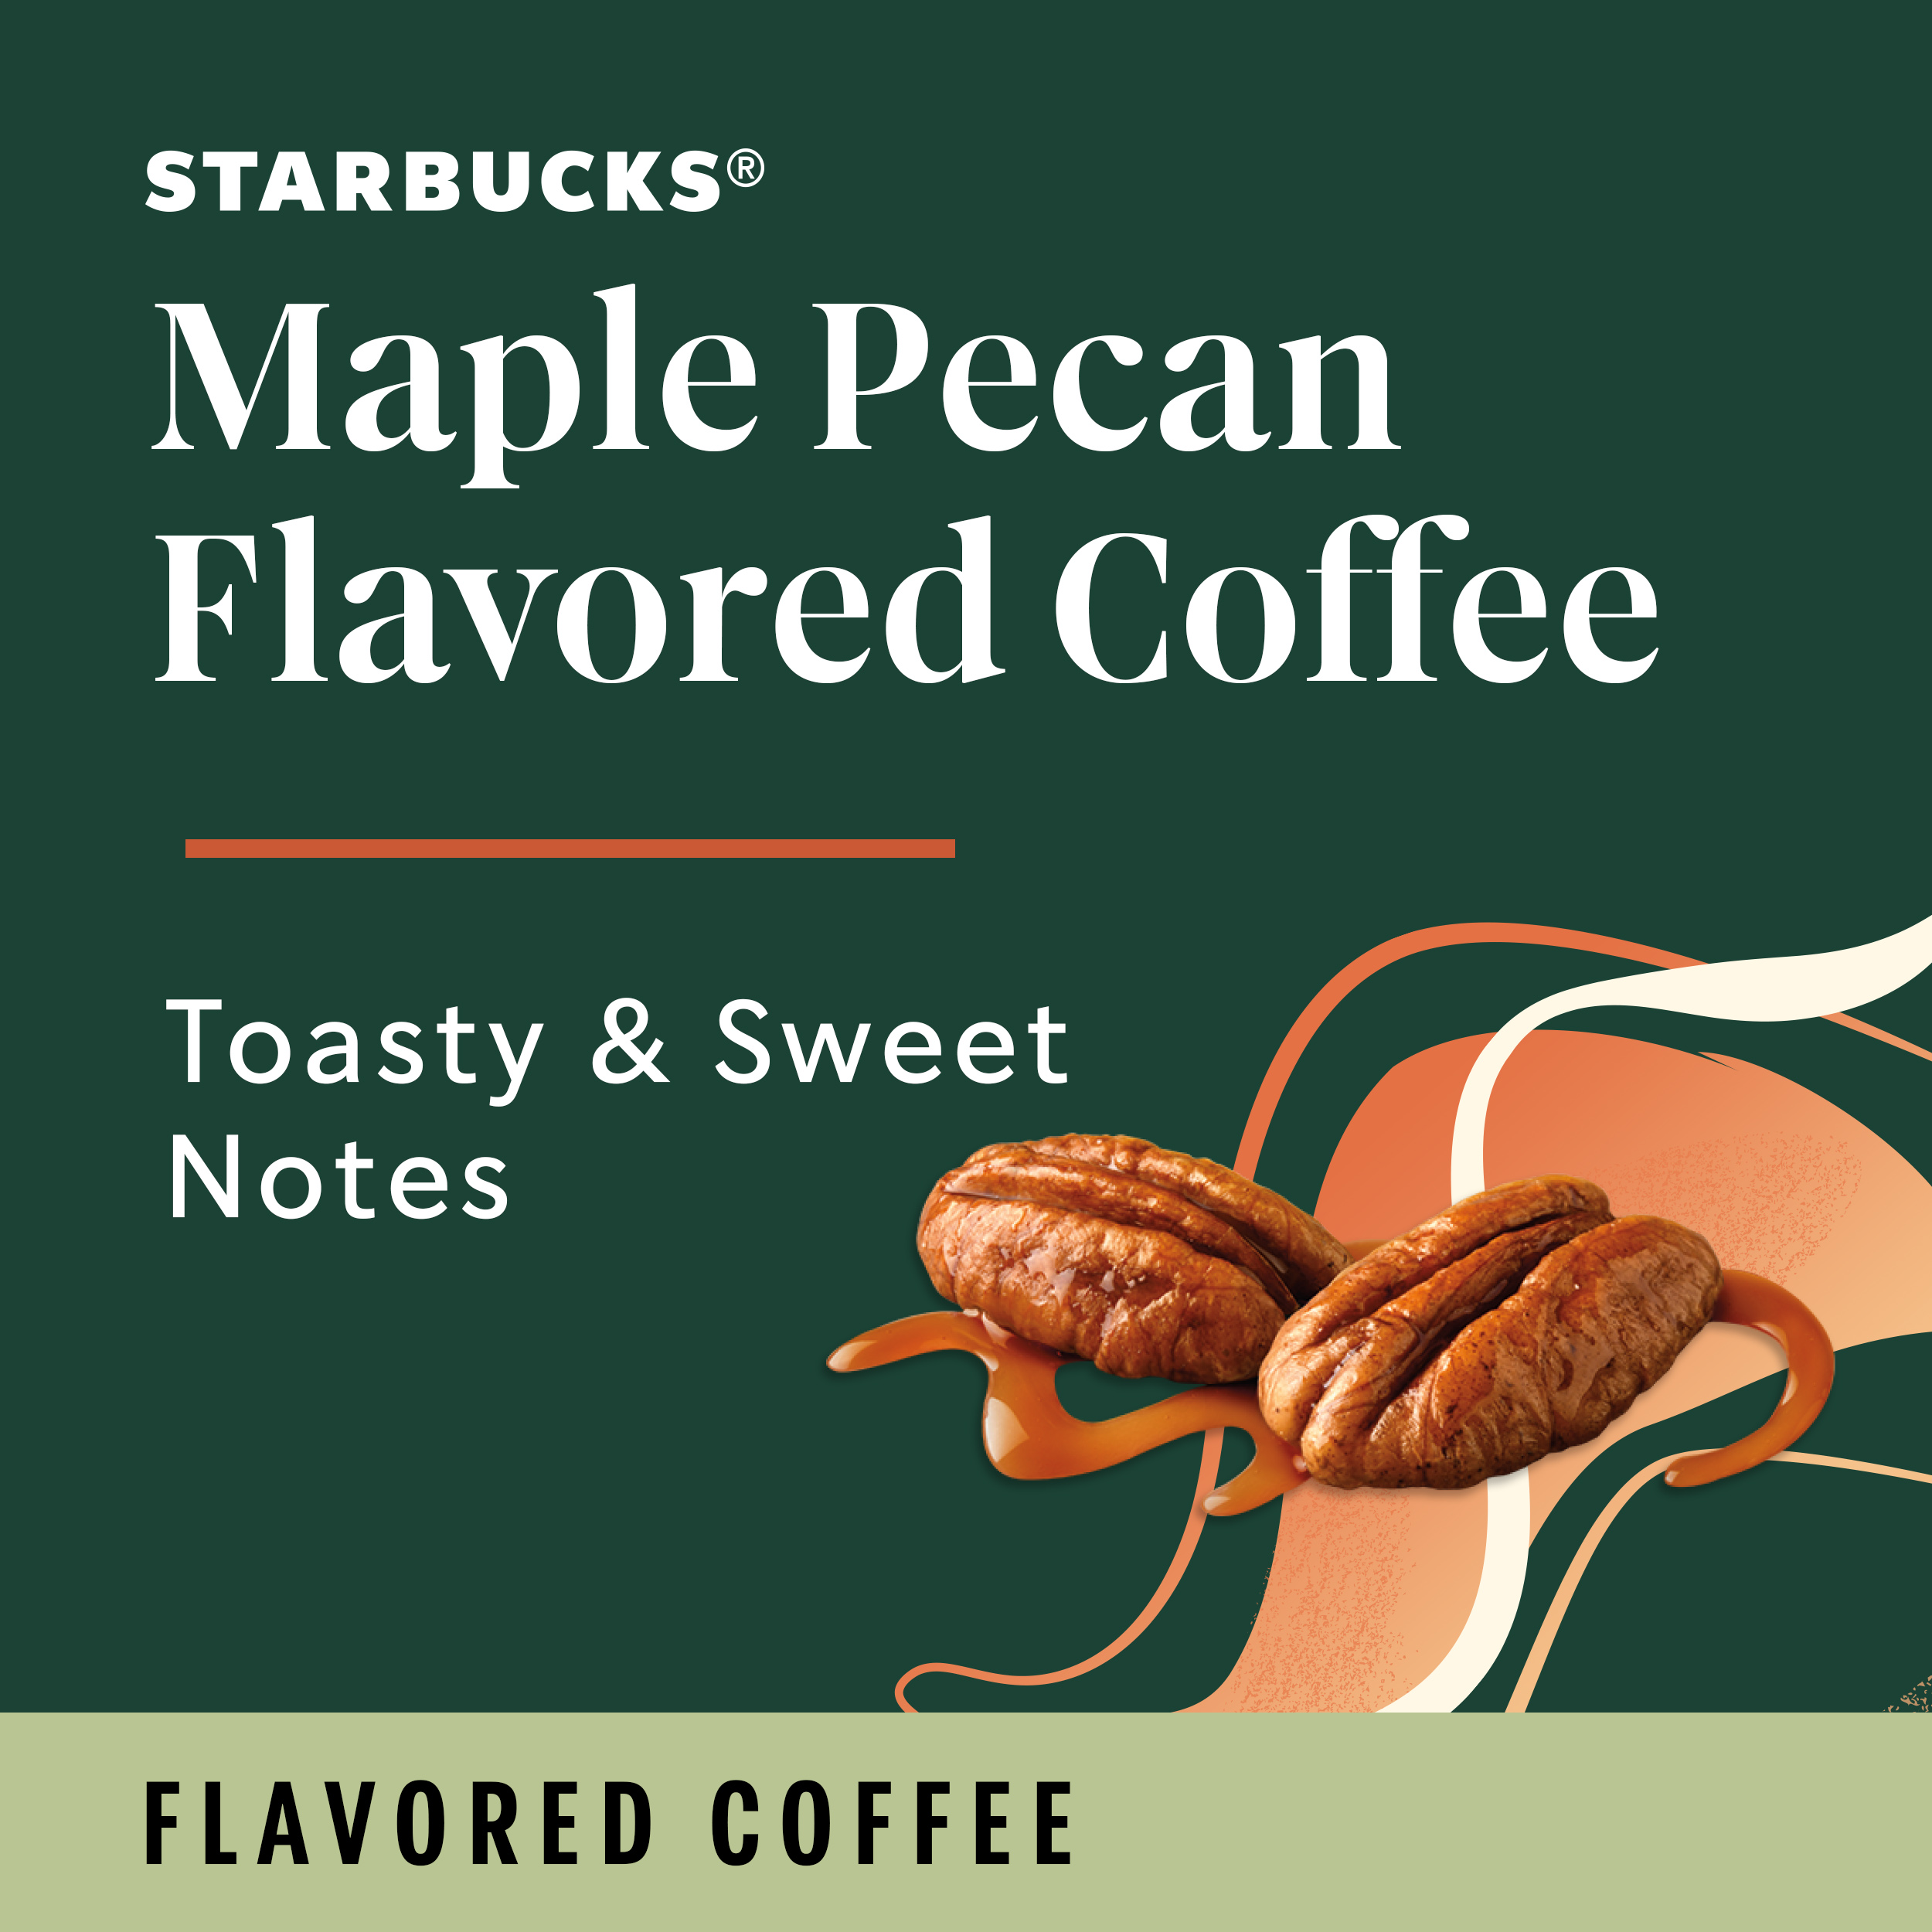 Starbucks Arabica Beans Maple Pecan, Naturally Flavored, Ground Coffee, 17 oz - image 3 of 8